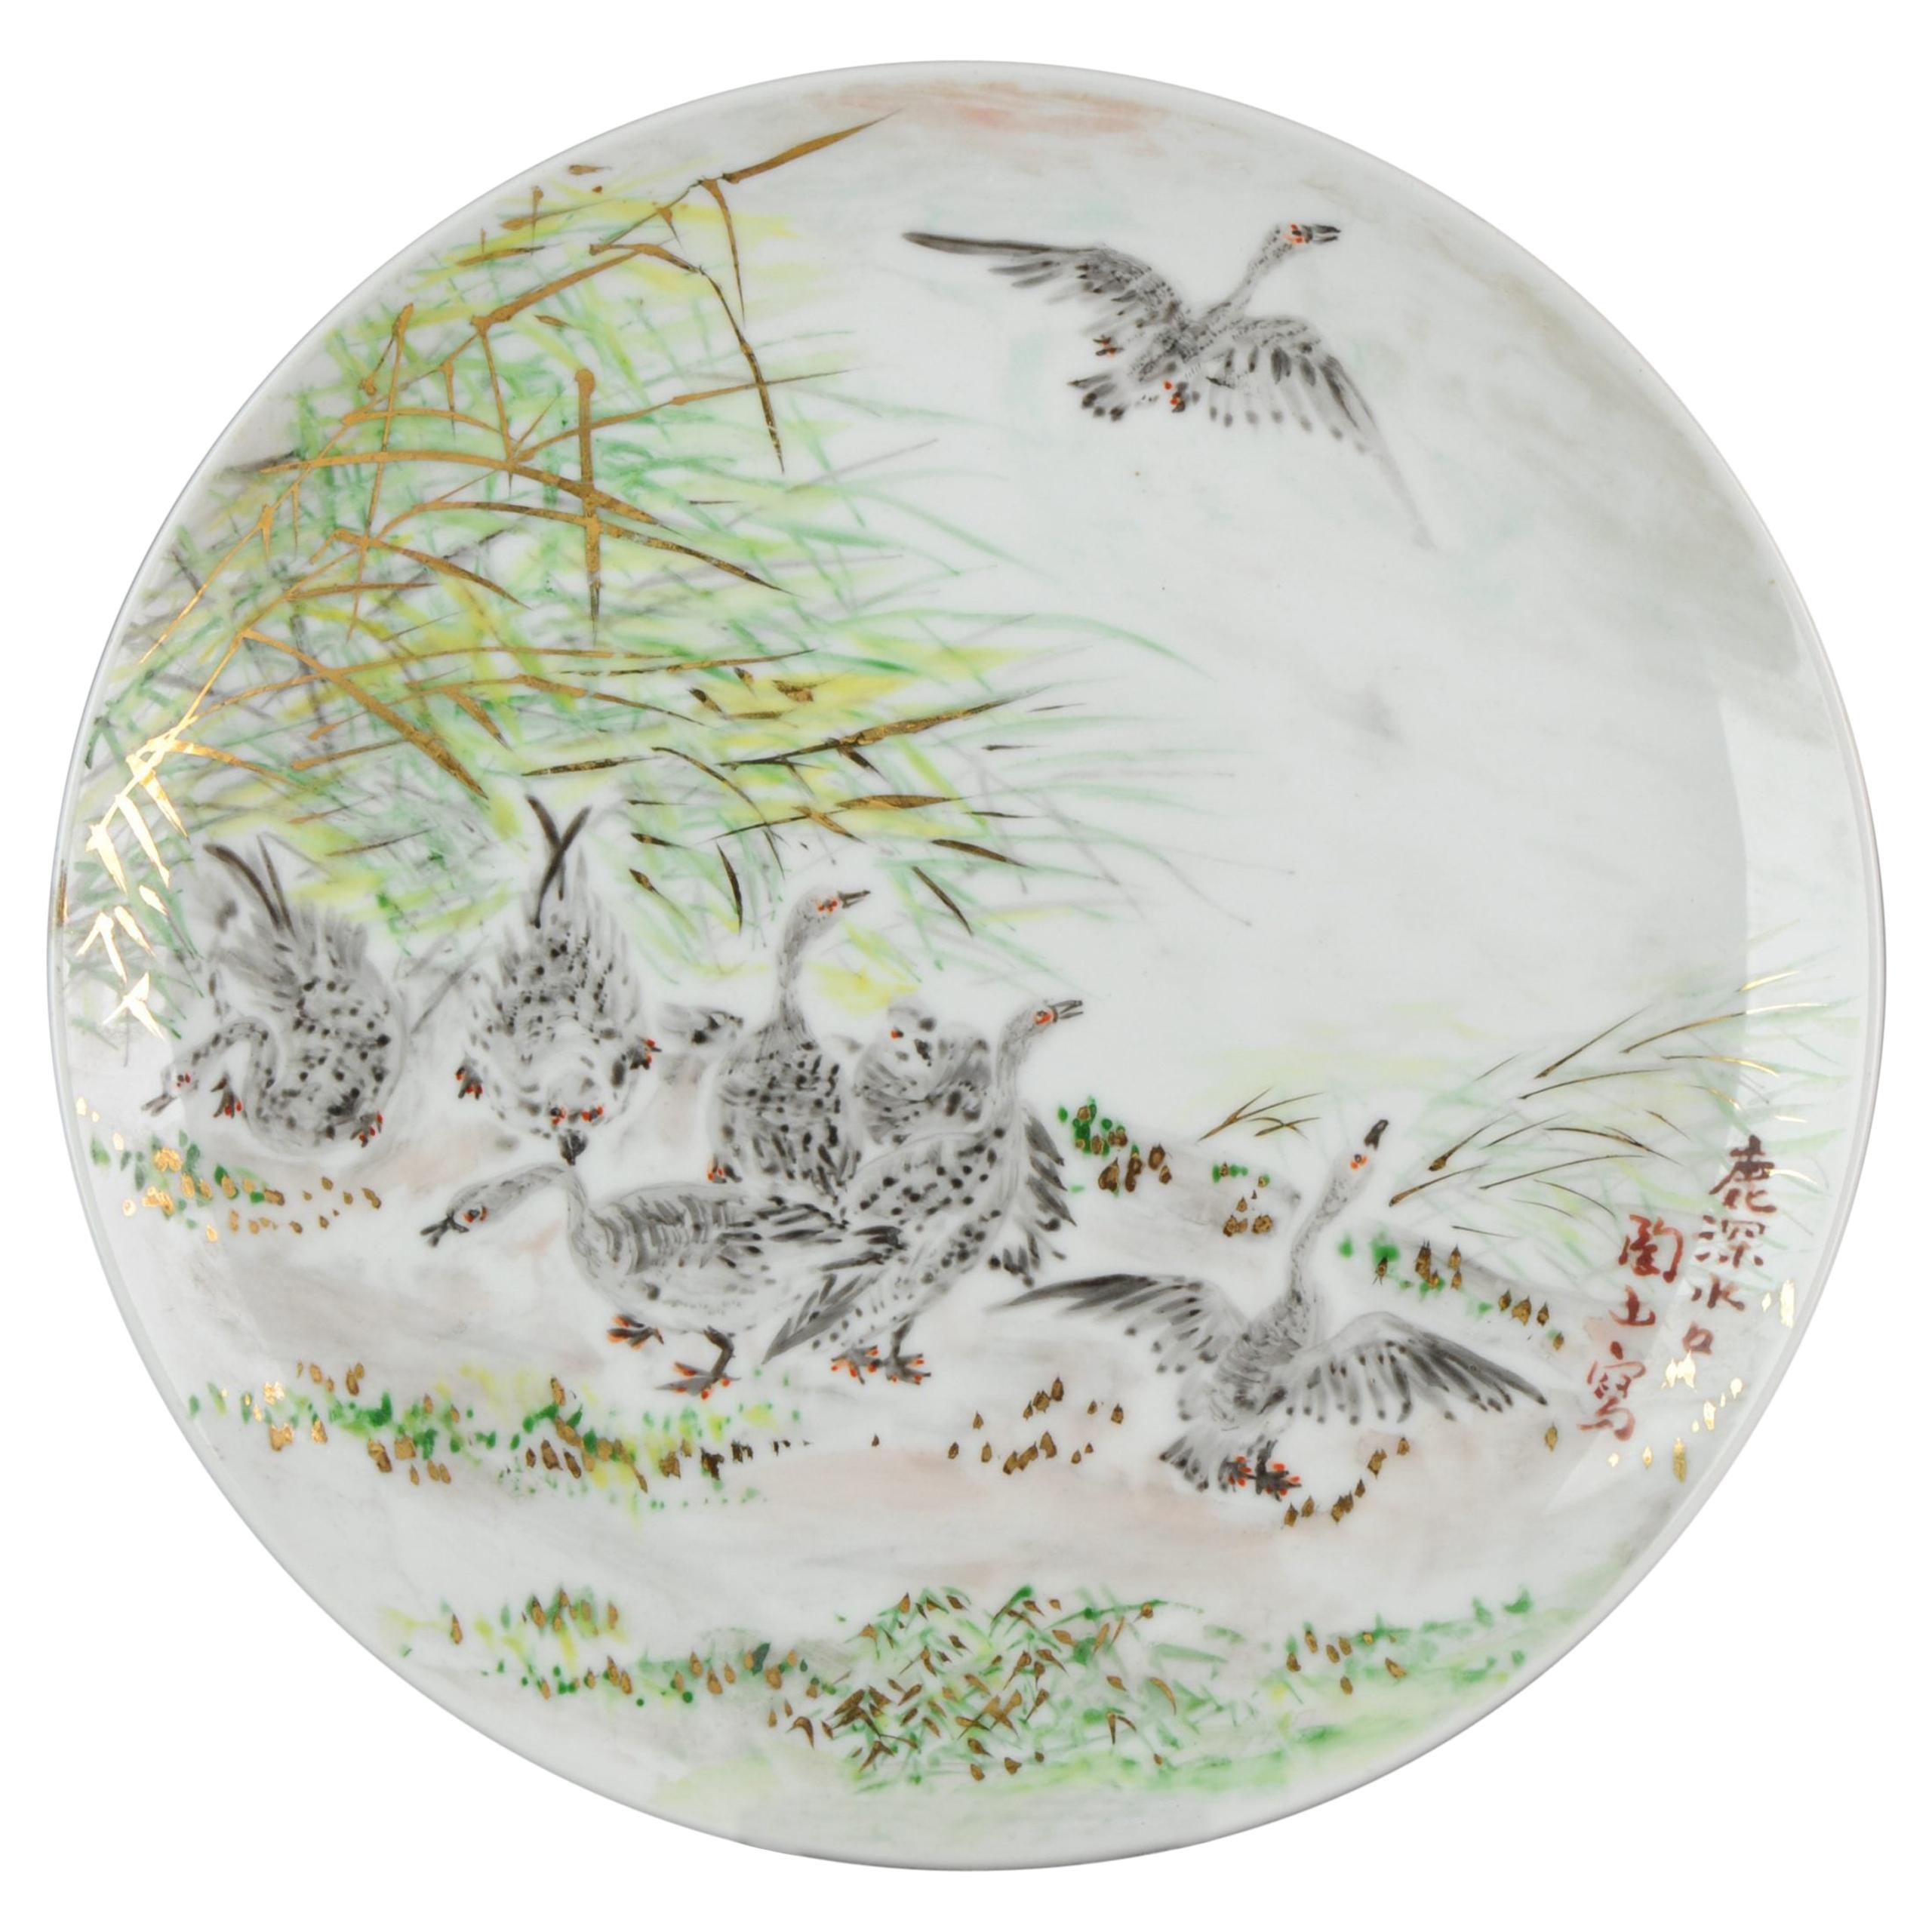 Perfect 20th-21st Century Japanese Porcelain Charger Birds Gooses in Landscape For Sale